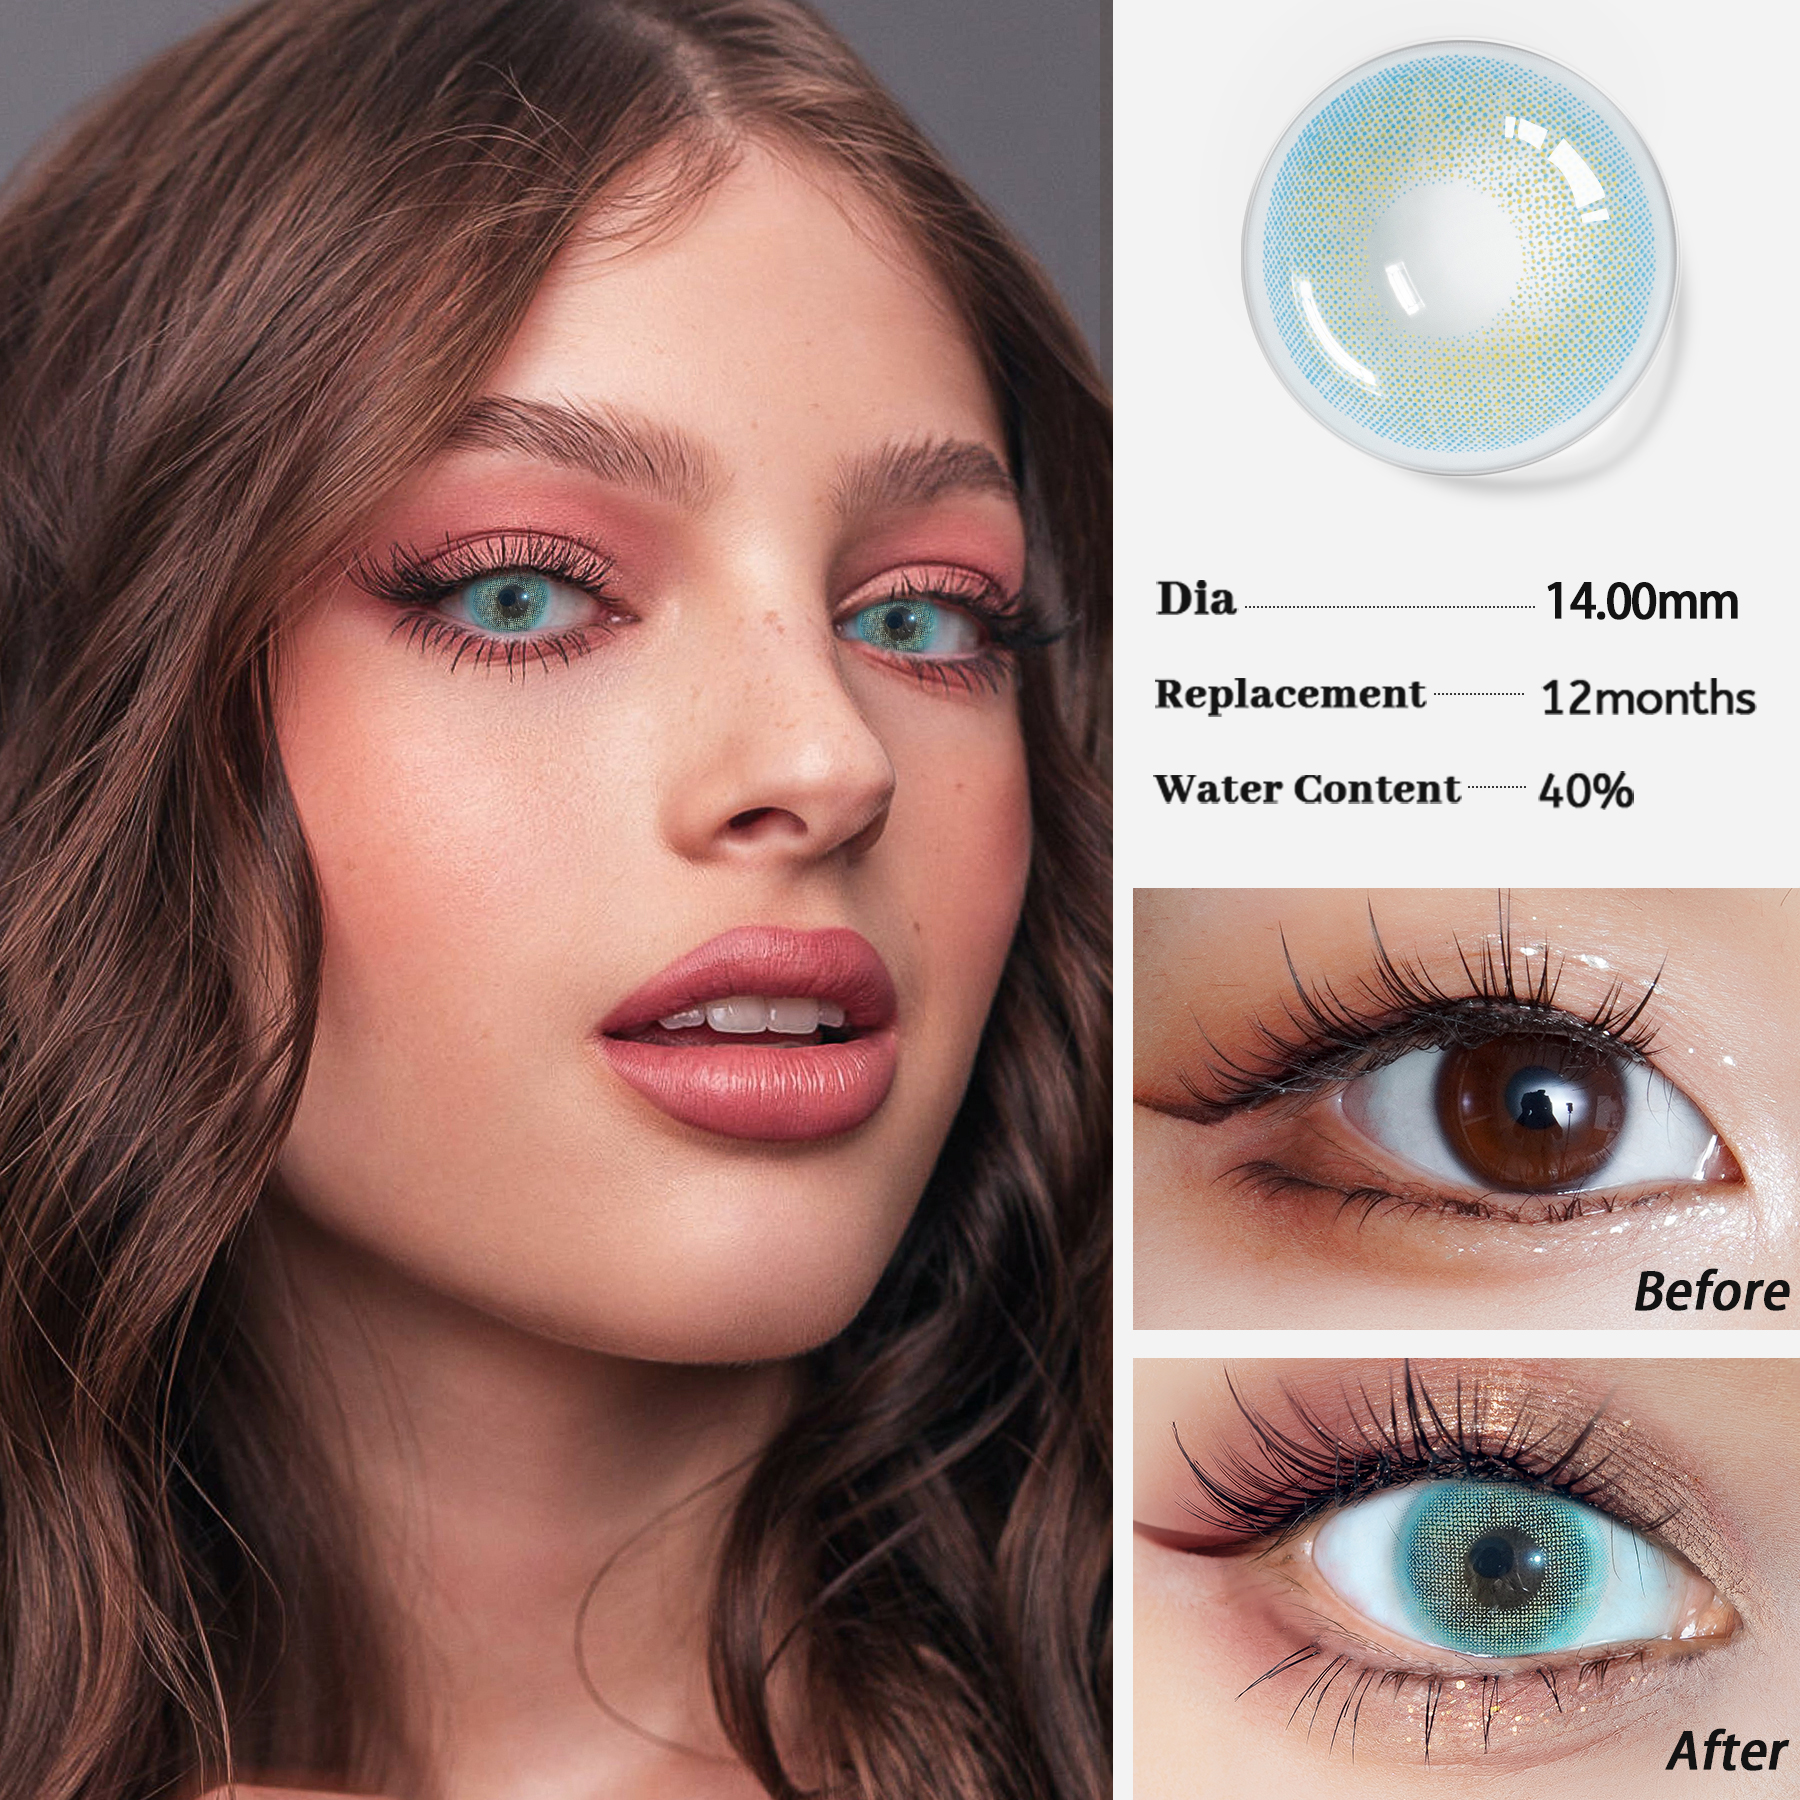 Colored Contacts Supplier Queen Most Natural Colored Contact Lenses Soft Contact Lens with Prescription Power Free Shipping